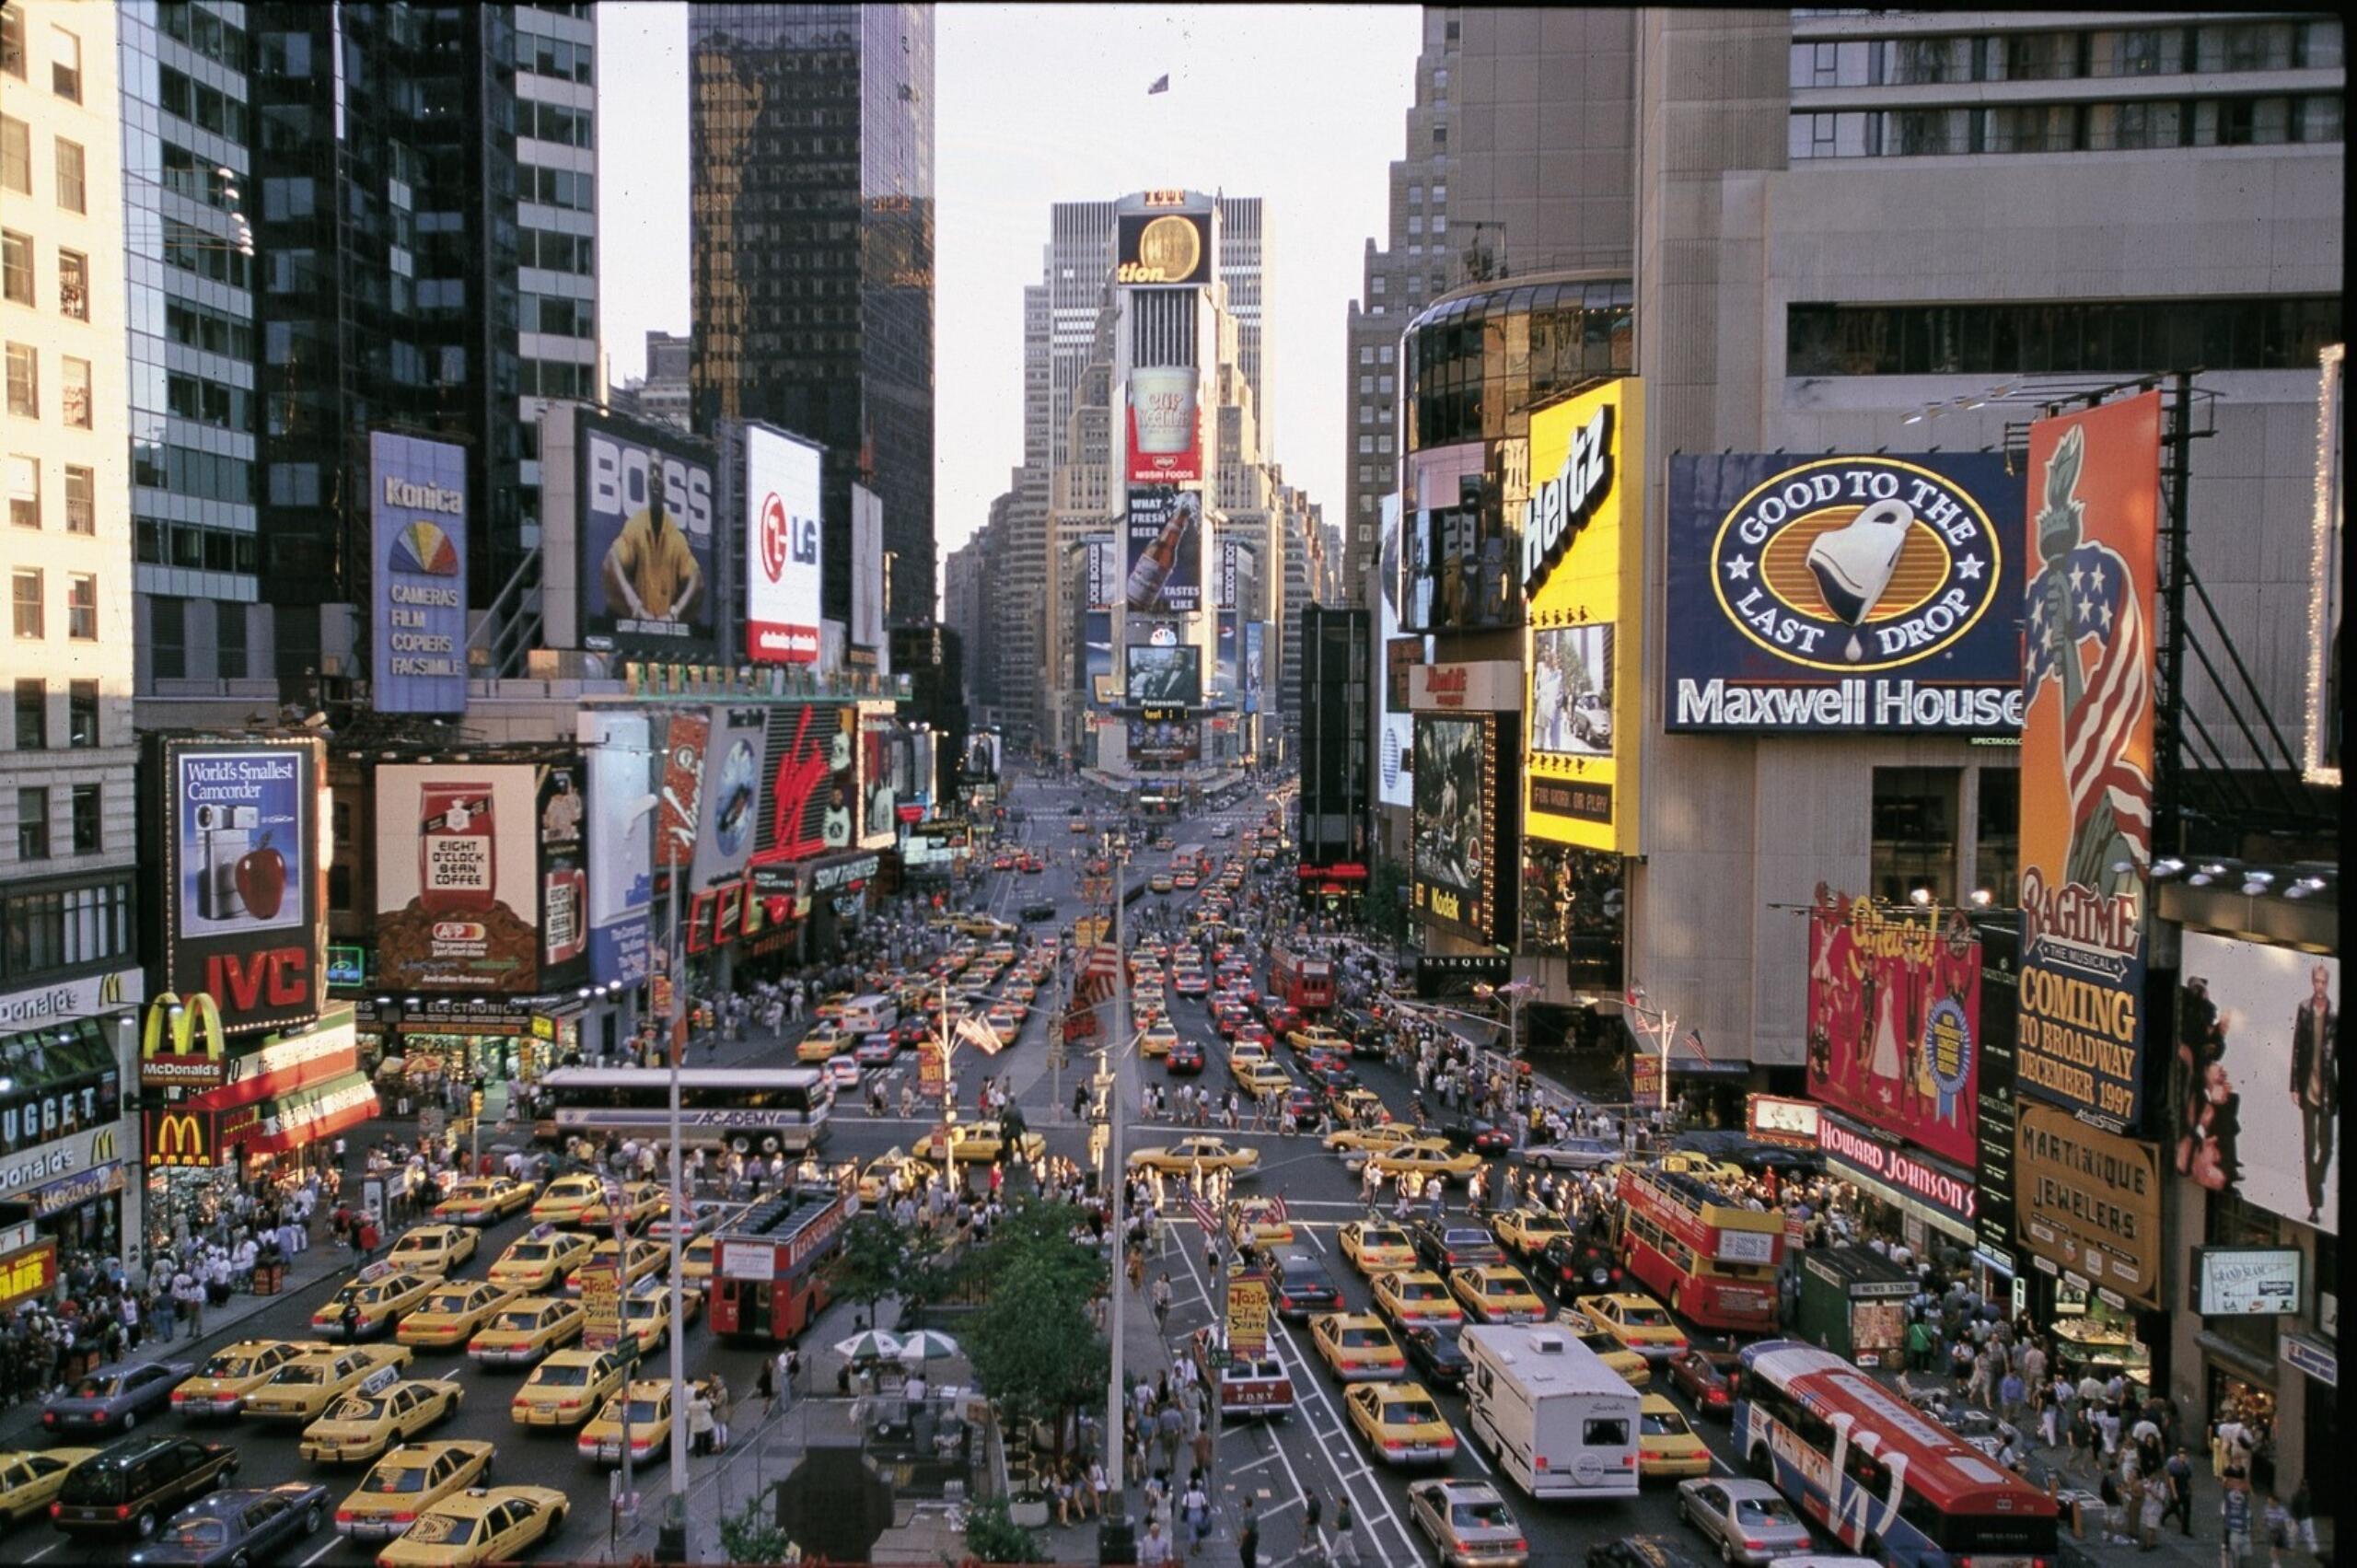 A late 1990s image of Times Square in New York City with One Times Square in the middle